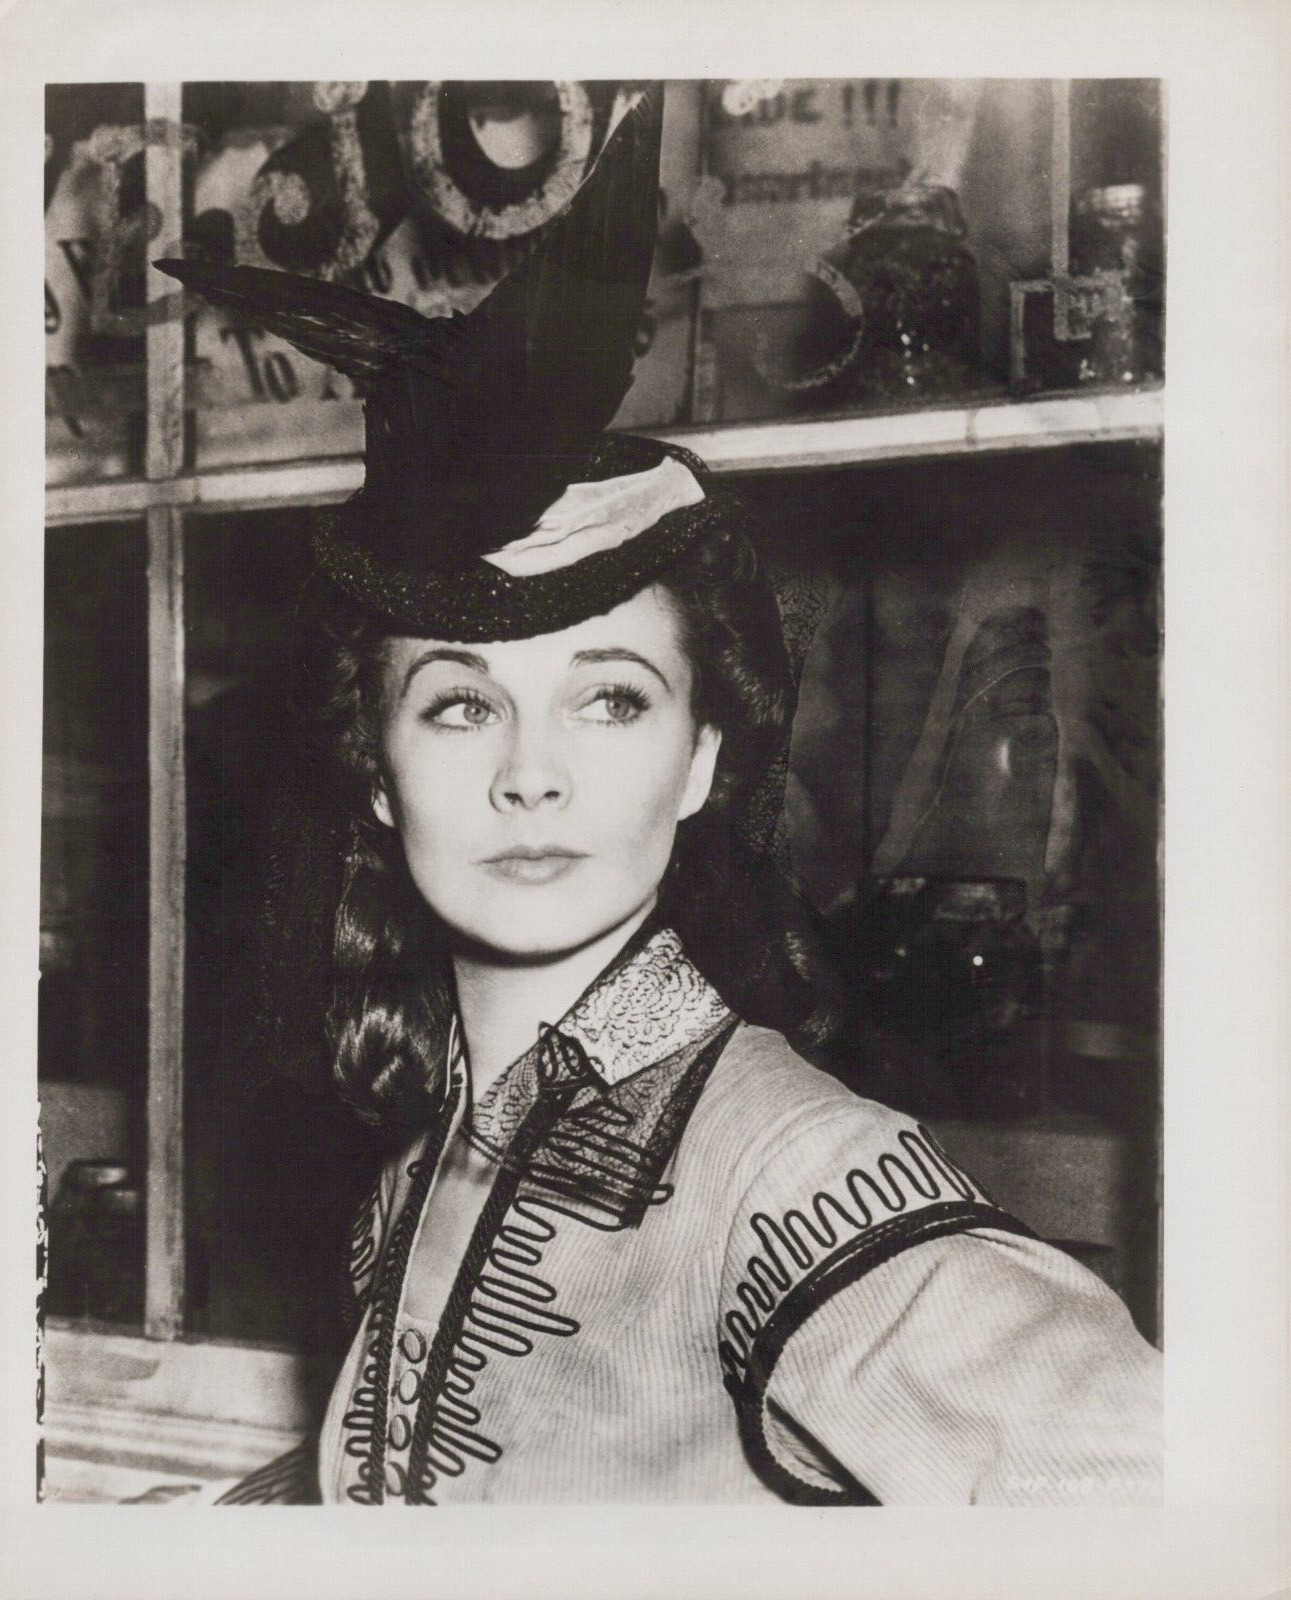 HOLLYWOOD BEAUTY Vivien Leigh BACKSTAGE STUNNING PORTRAIT 1950s ORIG Photo 424